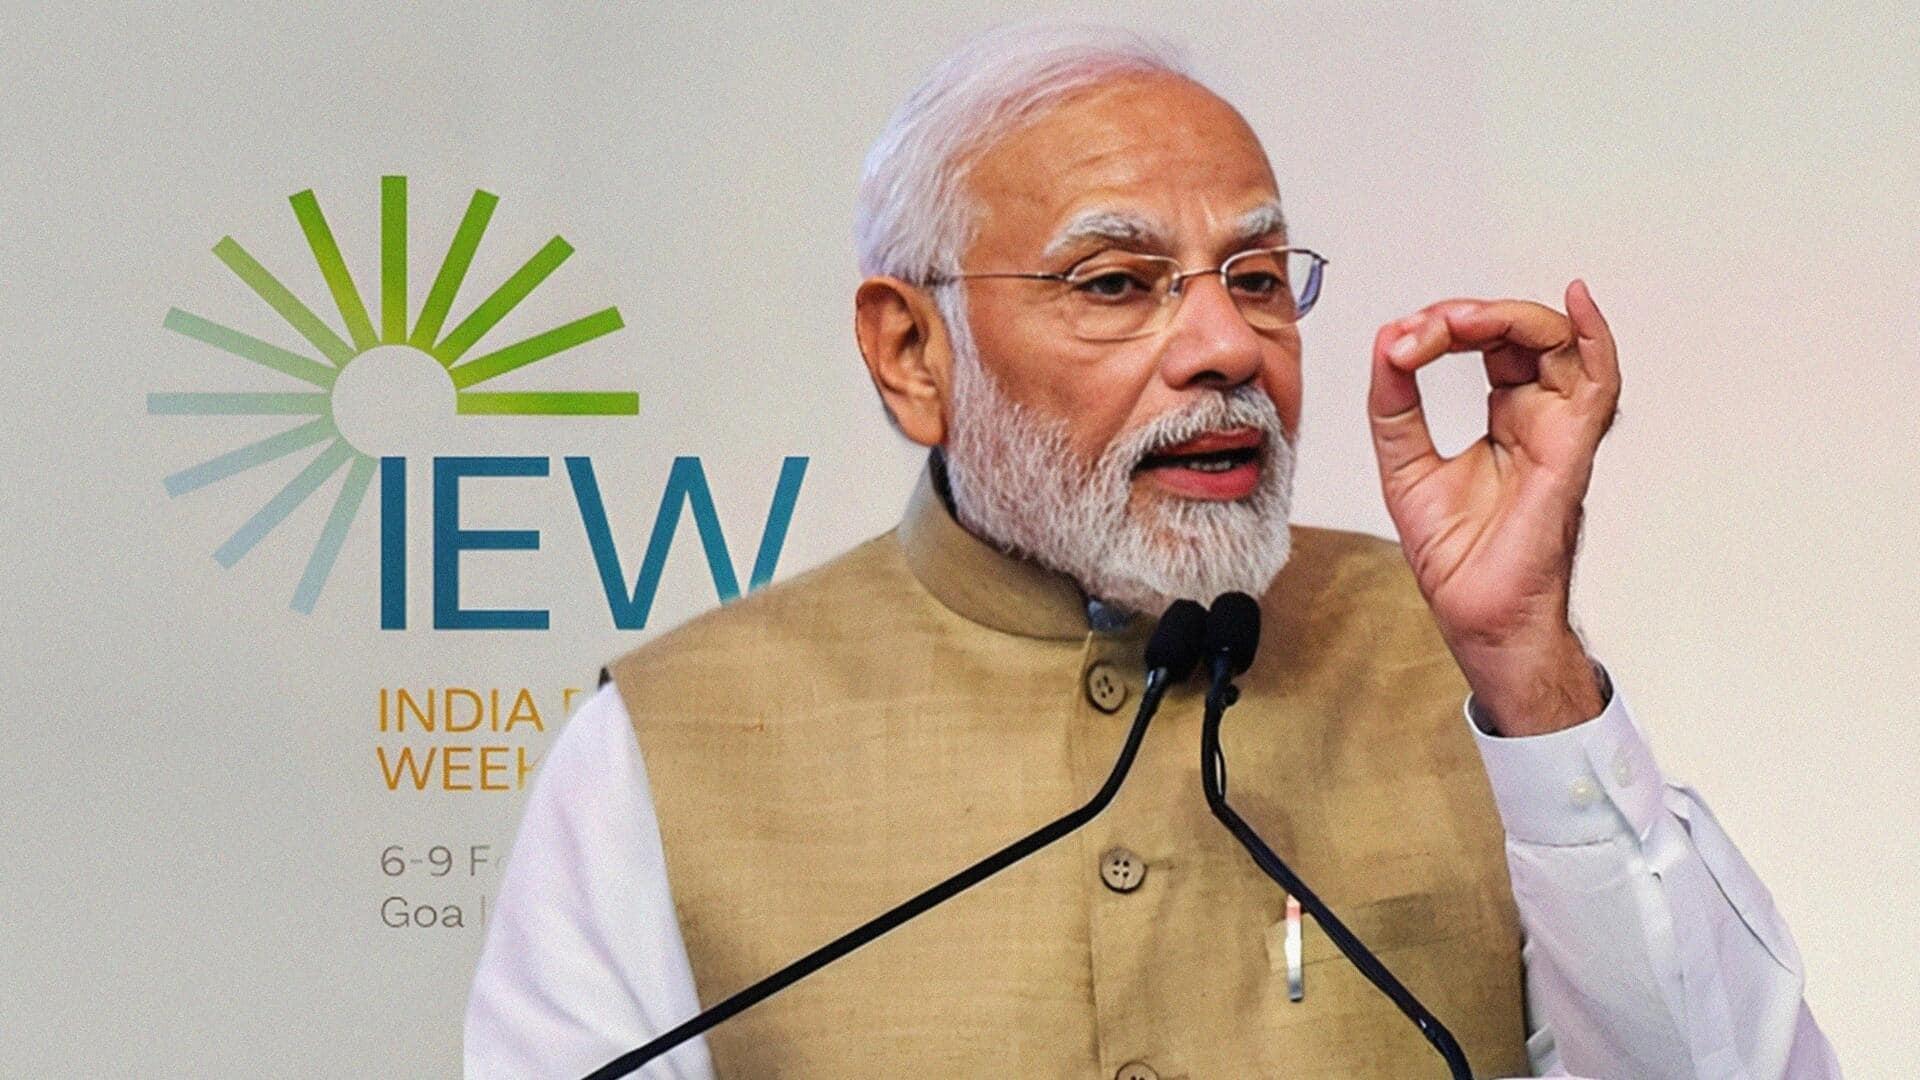 Modi outlines energy vision for India at Goa summit